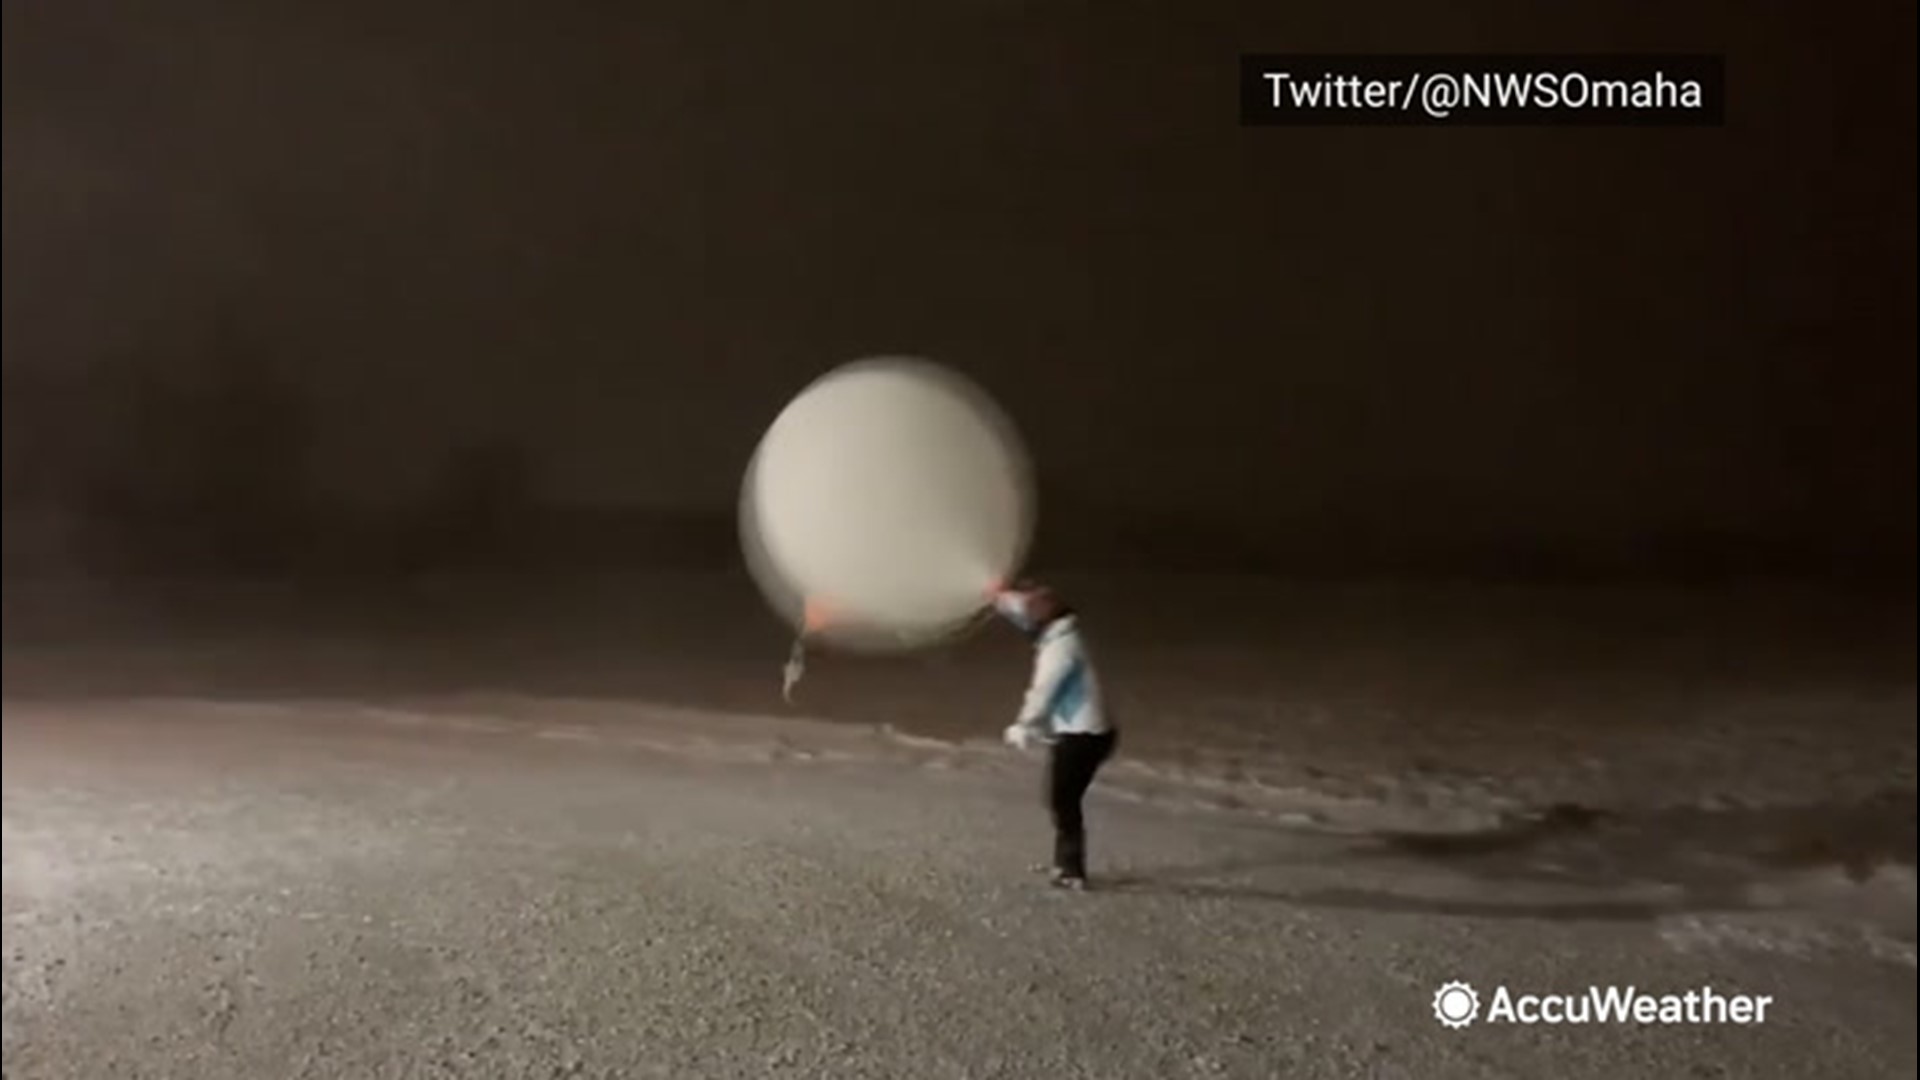 As potent winds whipped up snow, one meteorologist with the National Weather Service in Omaha, Nebraska, braved the elements to launch a weather balloon.